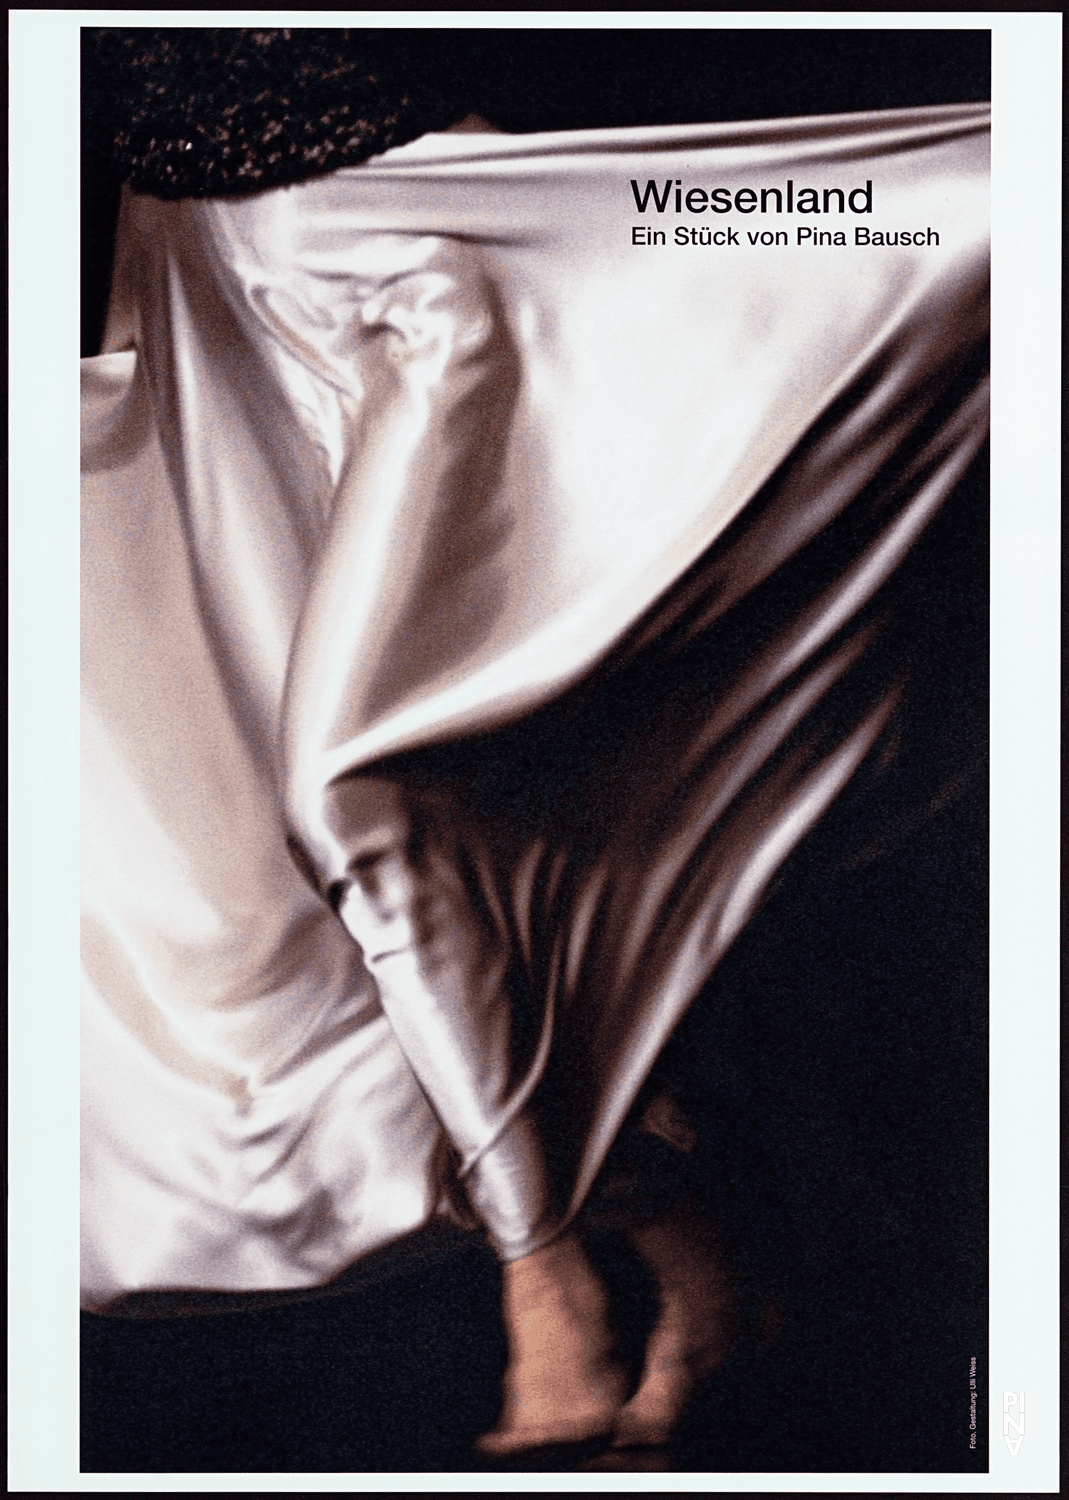 Poster for “Wiesenland” by Pina Bausch